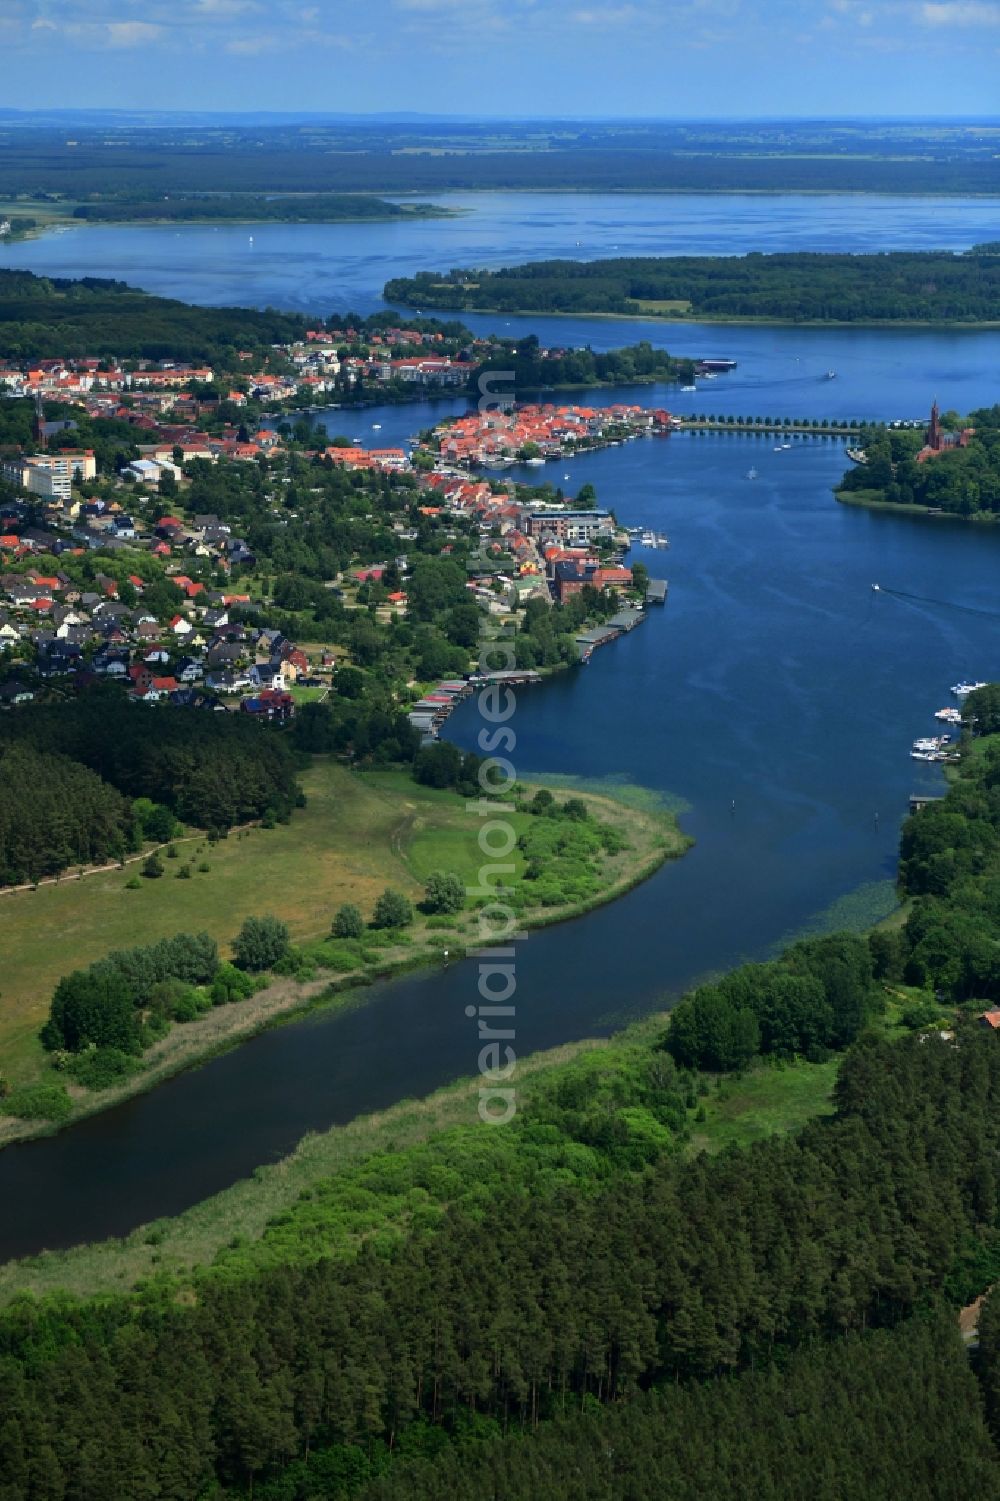 Malchow from above - Village on the banks of the area Malchower See in Malchow in the state Mecklenburg - Western Pomerania, Germany